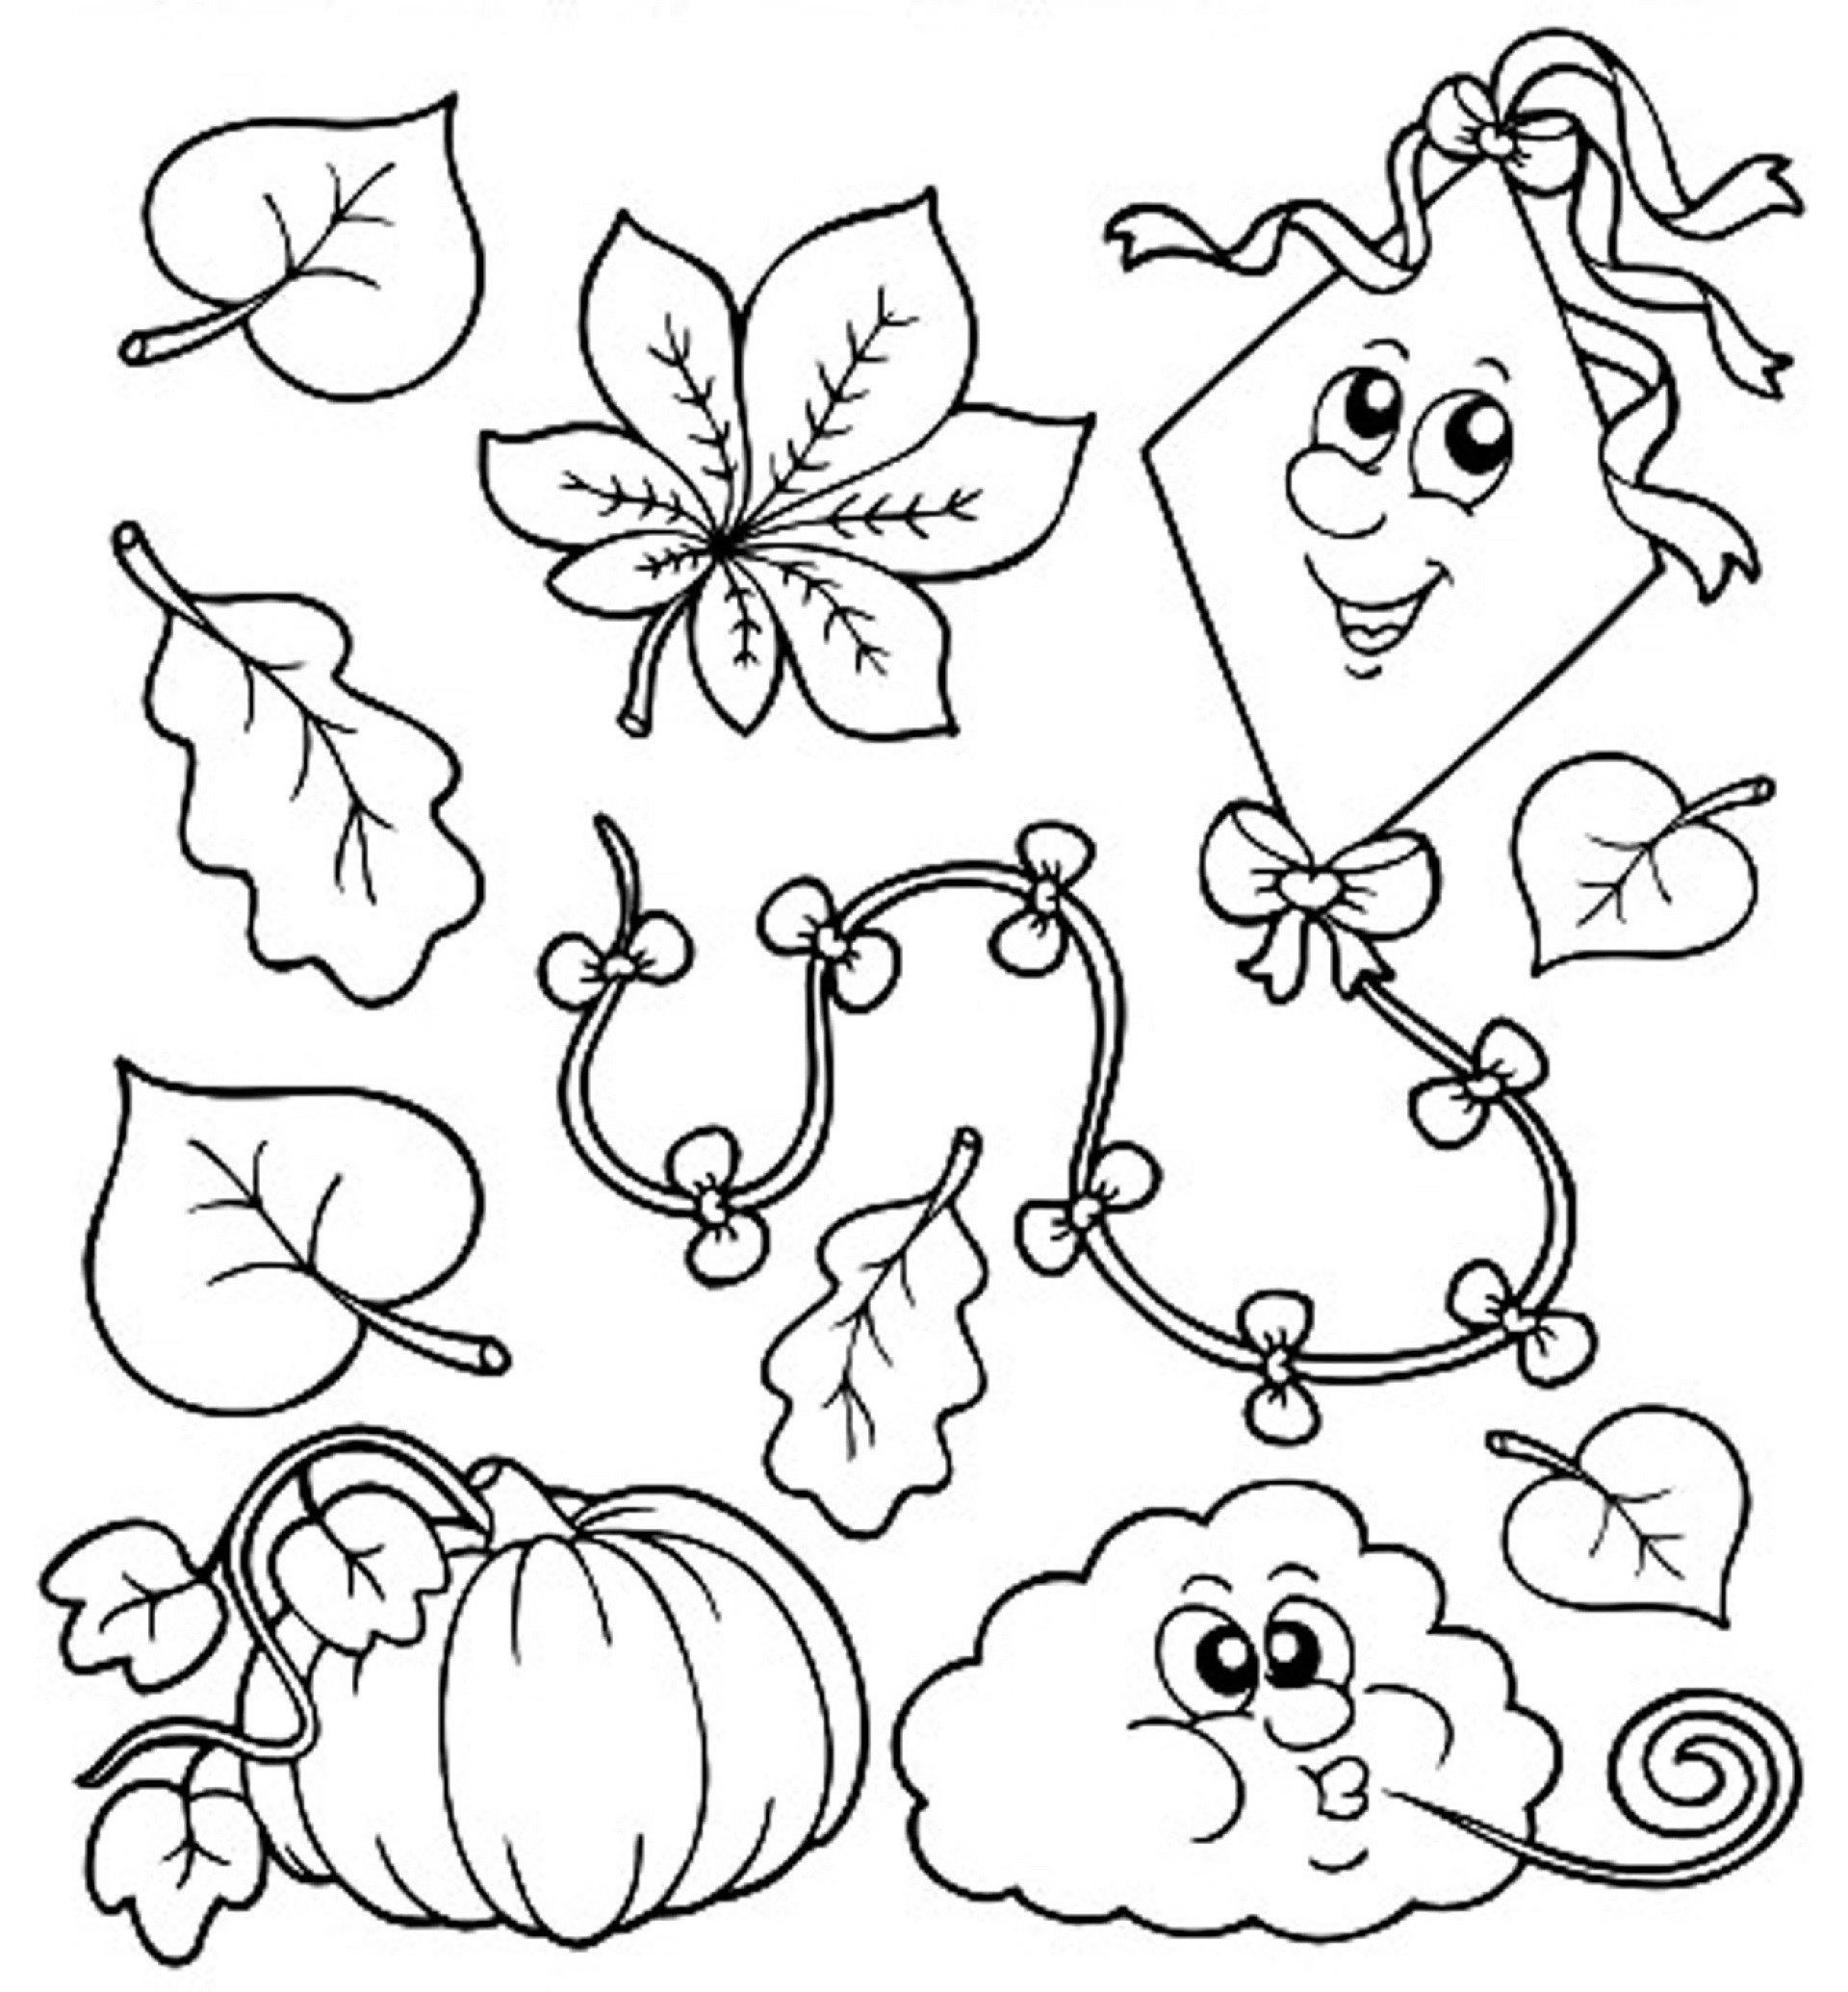 Printable Fall Coloring Pages
 Fall Coloring Pages for Kindergarten